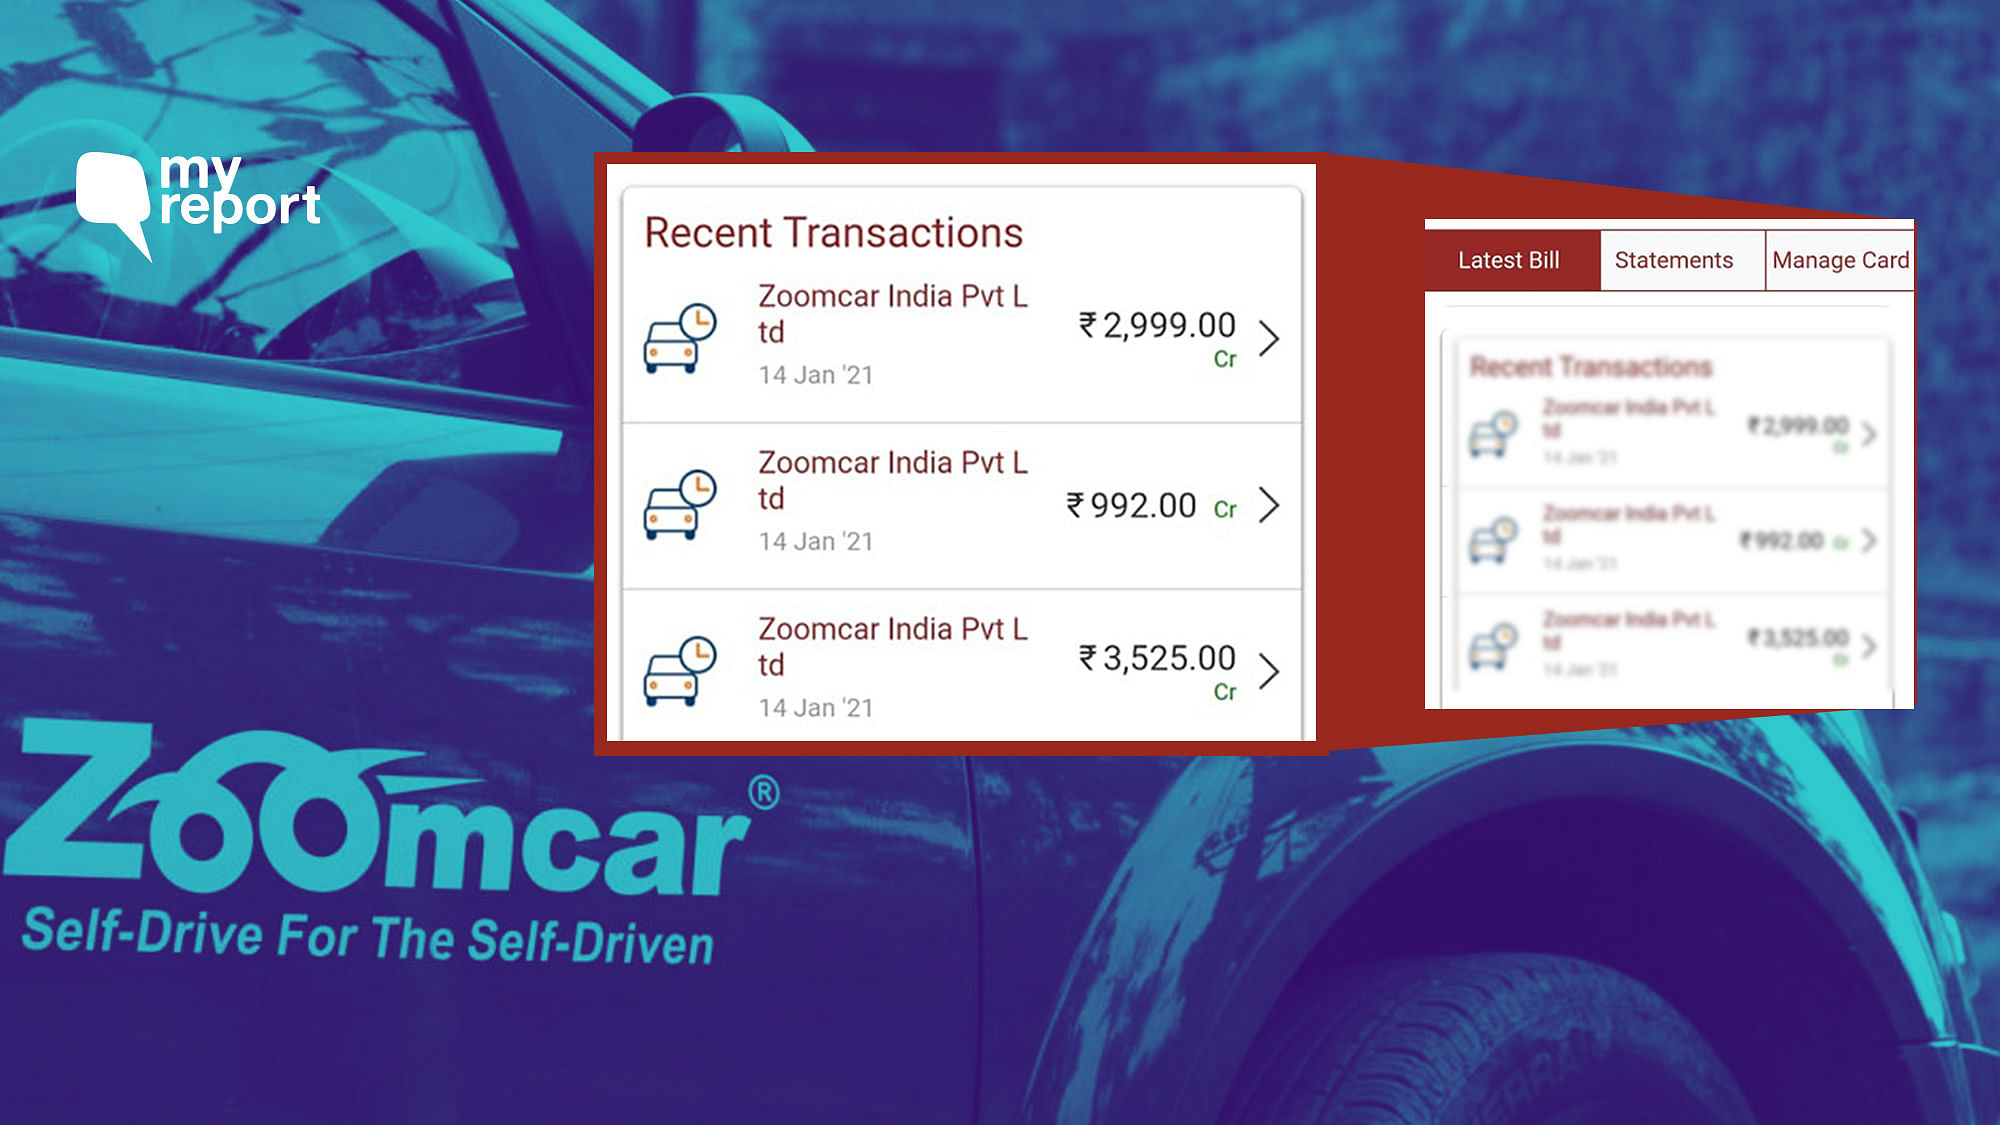 Tohid Shaikh got his refund from Zoomcar after his story was published in <b>The Quint</b>.